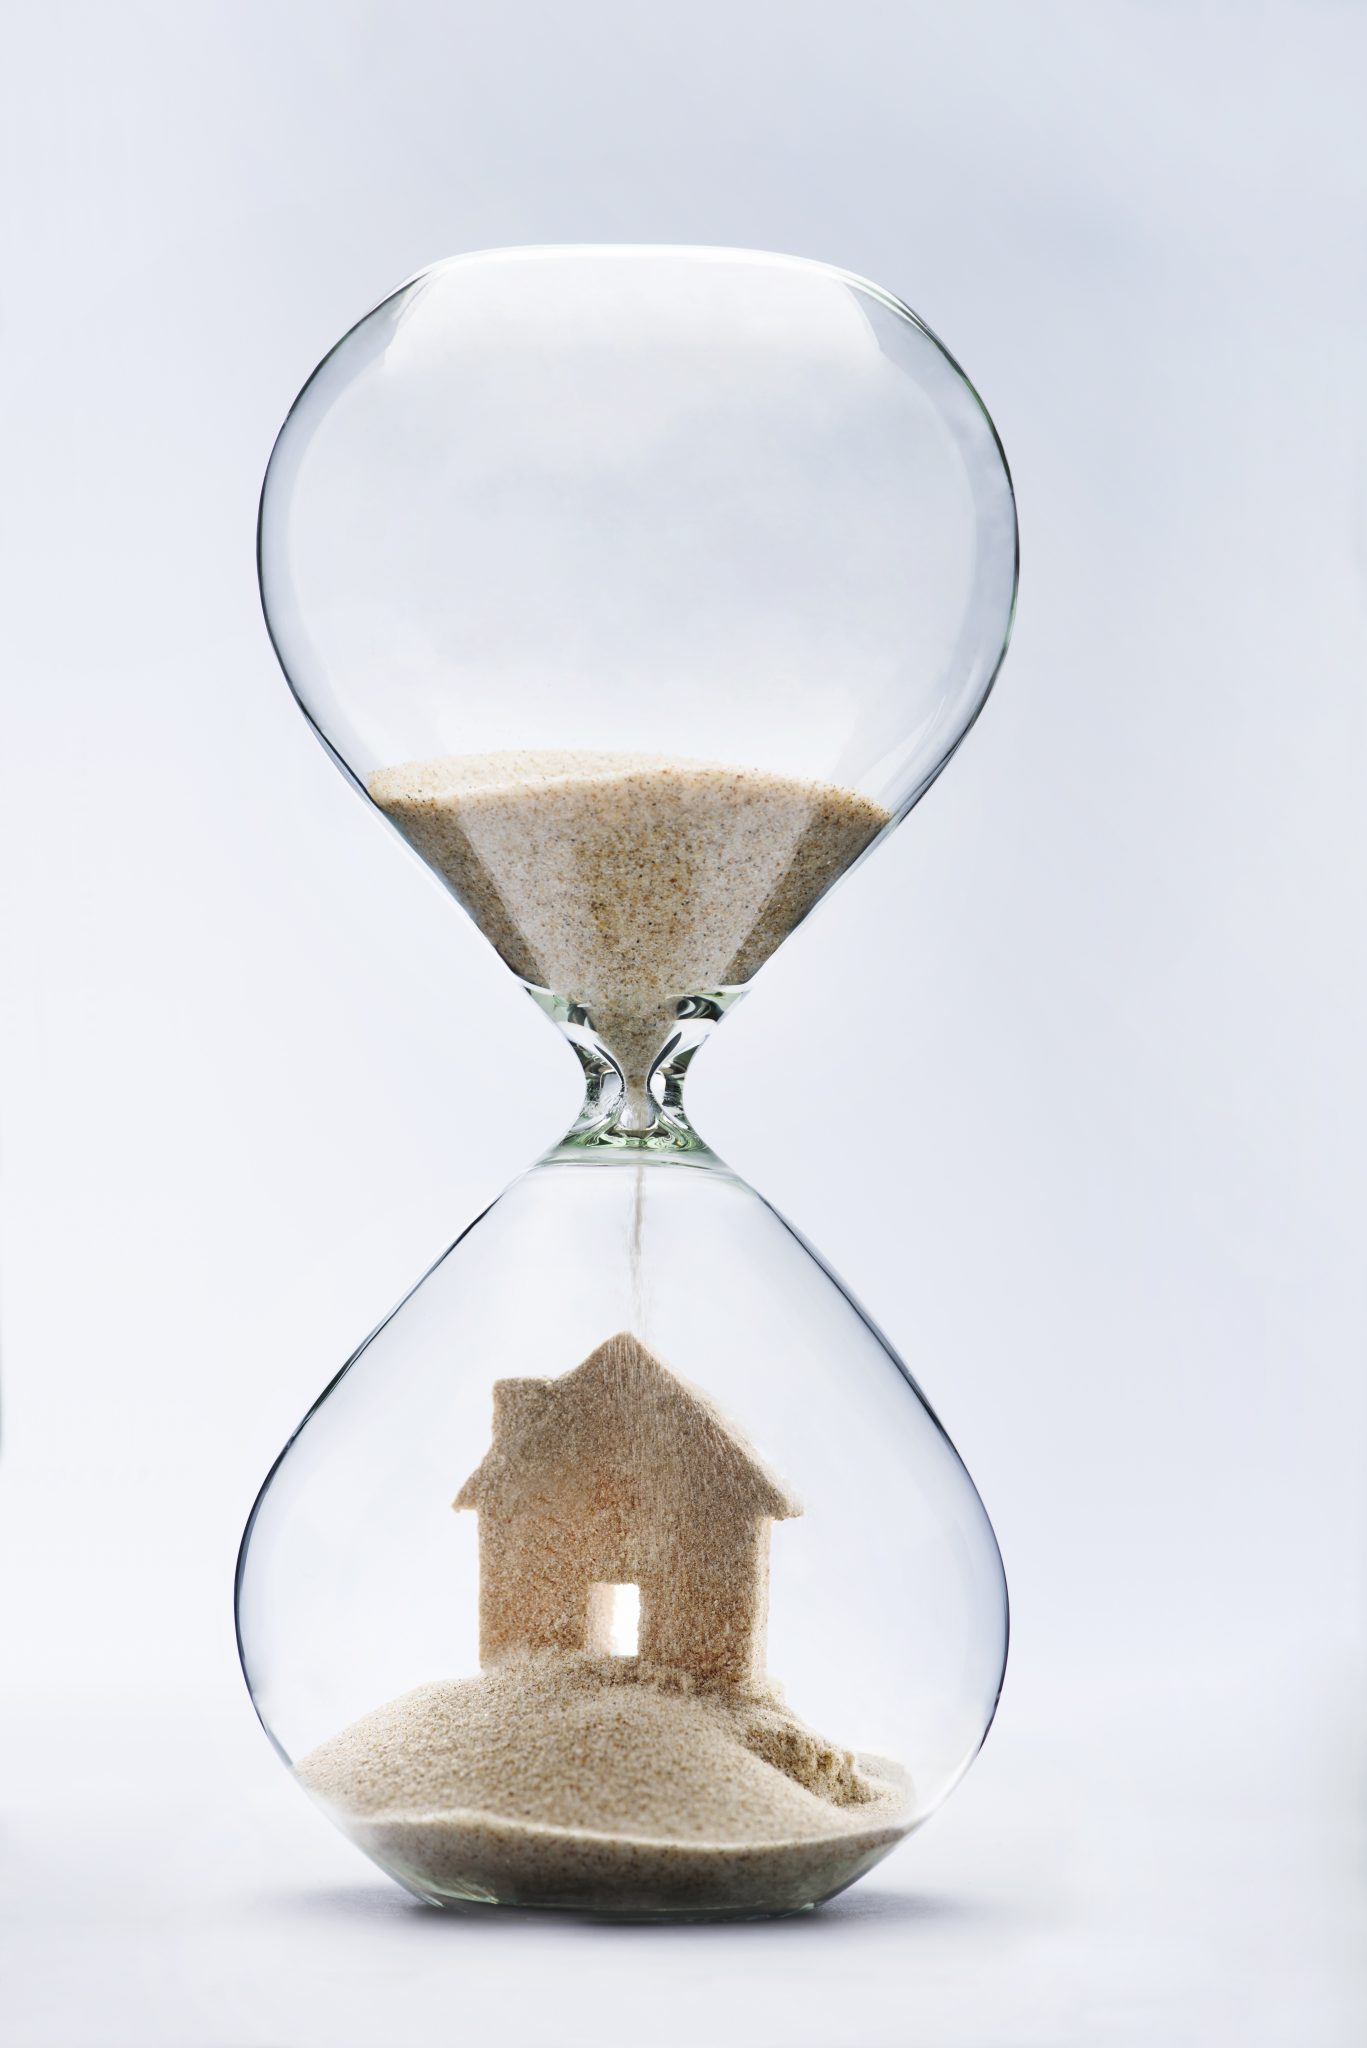 When is the Best Time to Buy a House & Lock in a Mortgage?